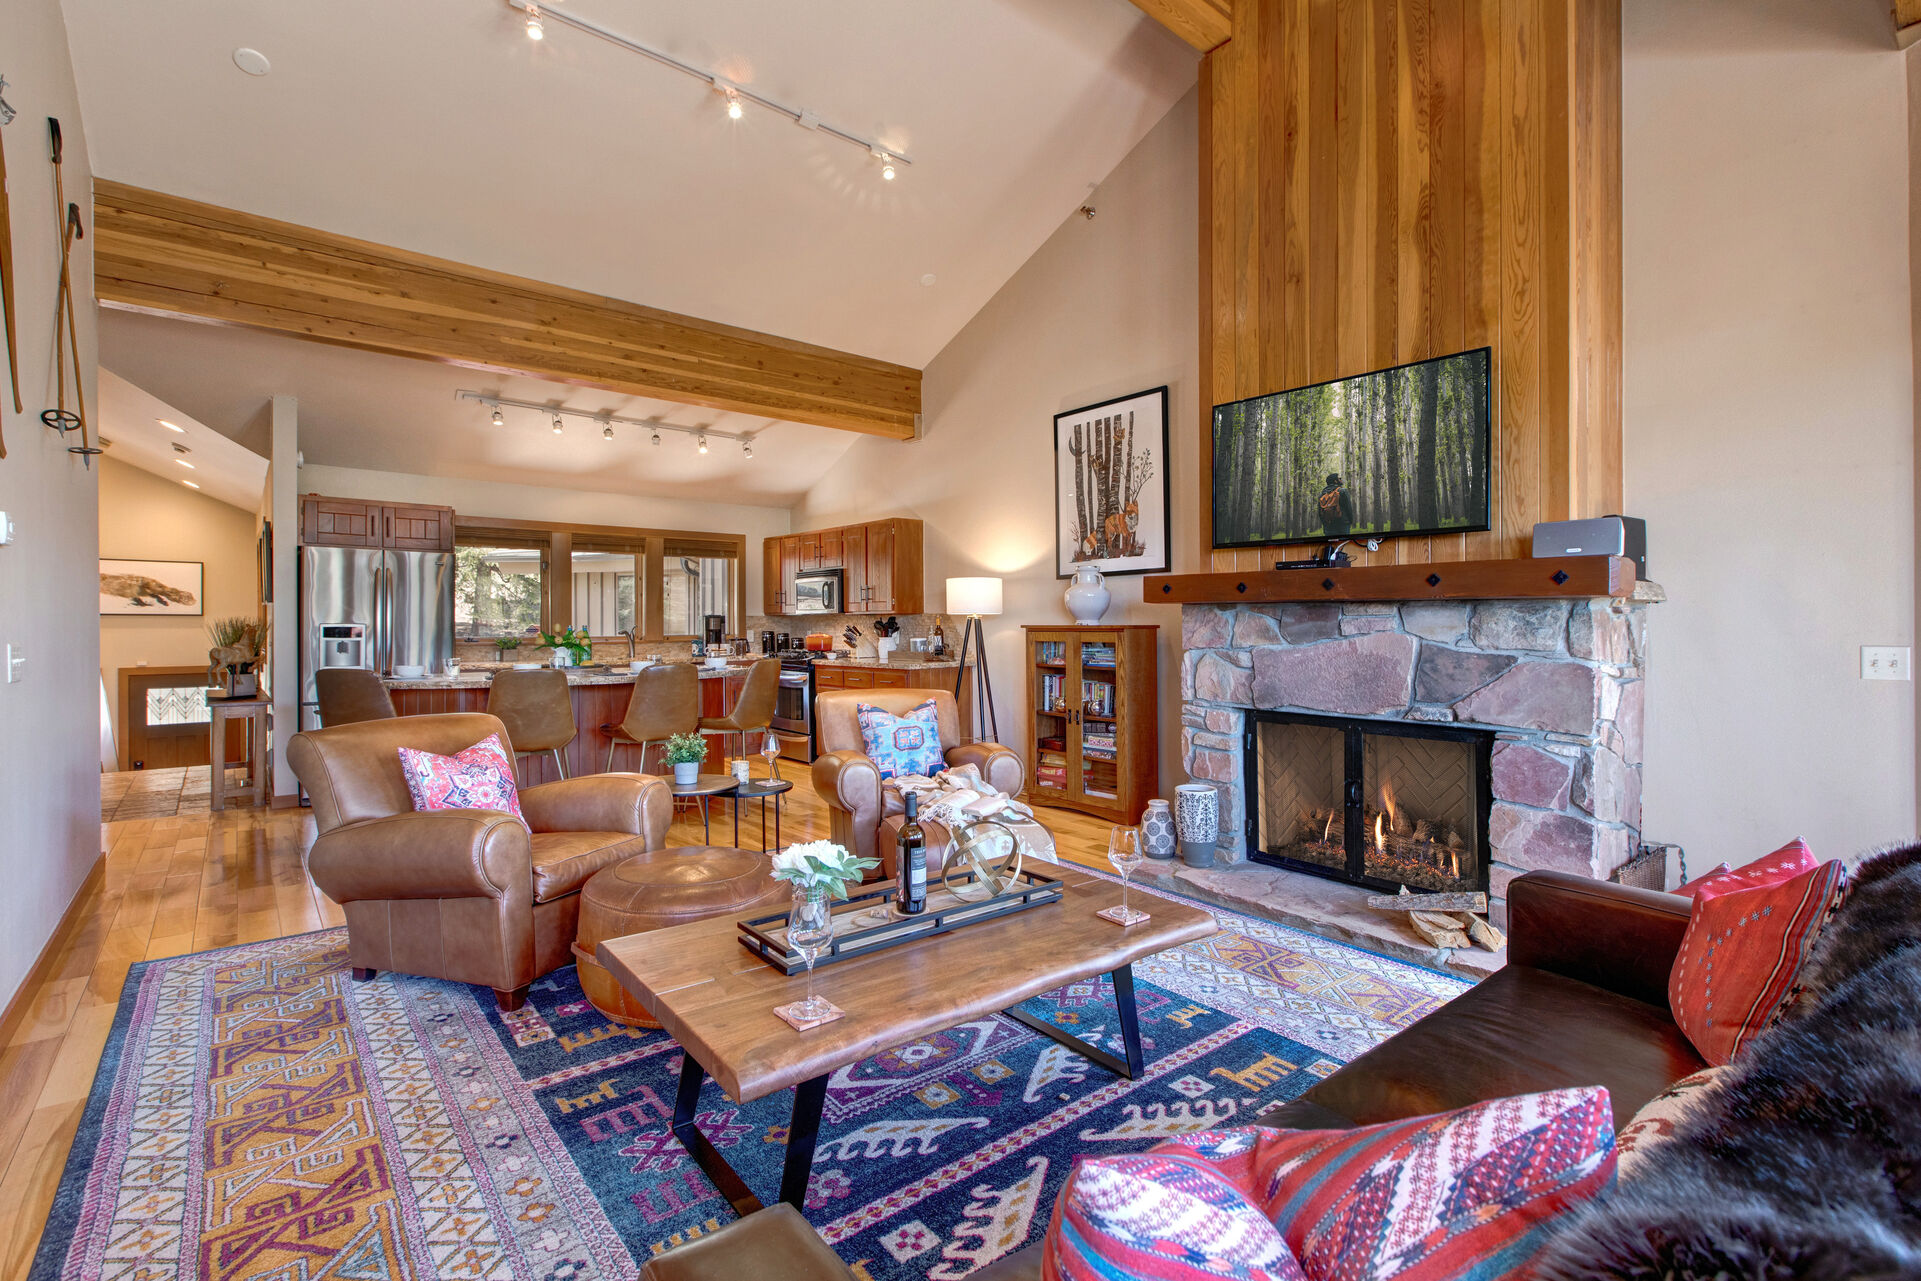 Great Room with Hardwood Flooring, a Vaulted Ceiling, Smart TV and a Warm Wood Burning Fireplace